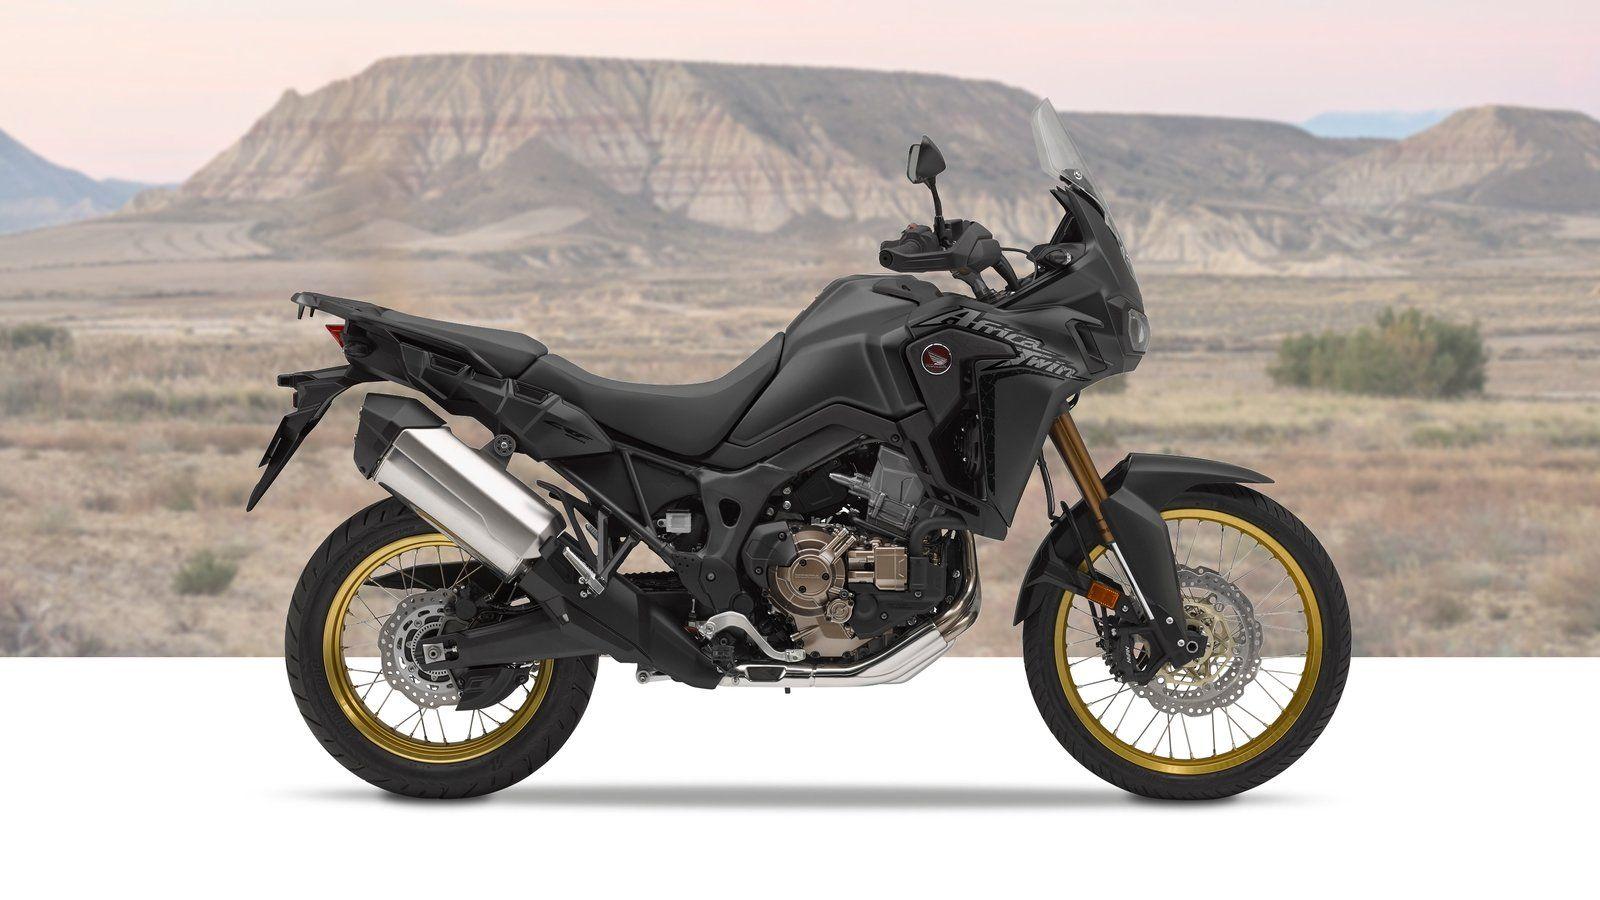 Honda Africa Twin Picture, Photo, Wallpaper